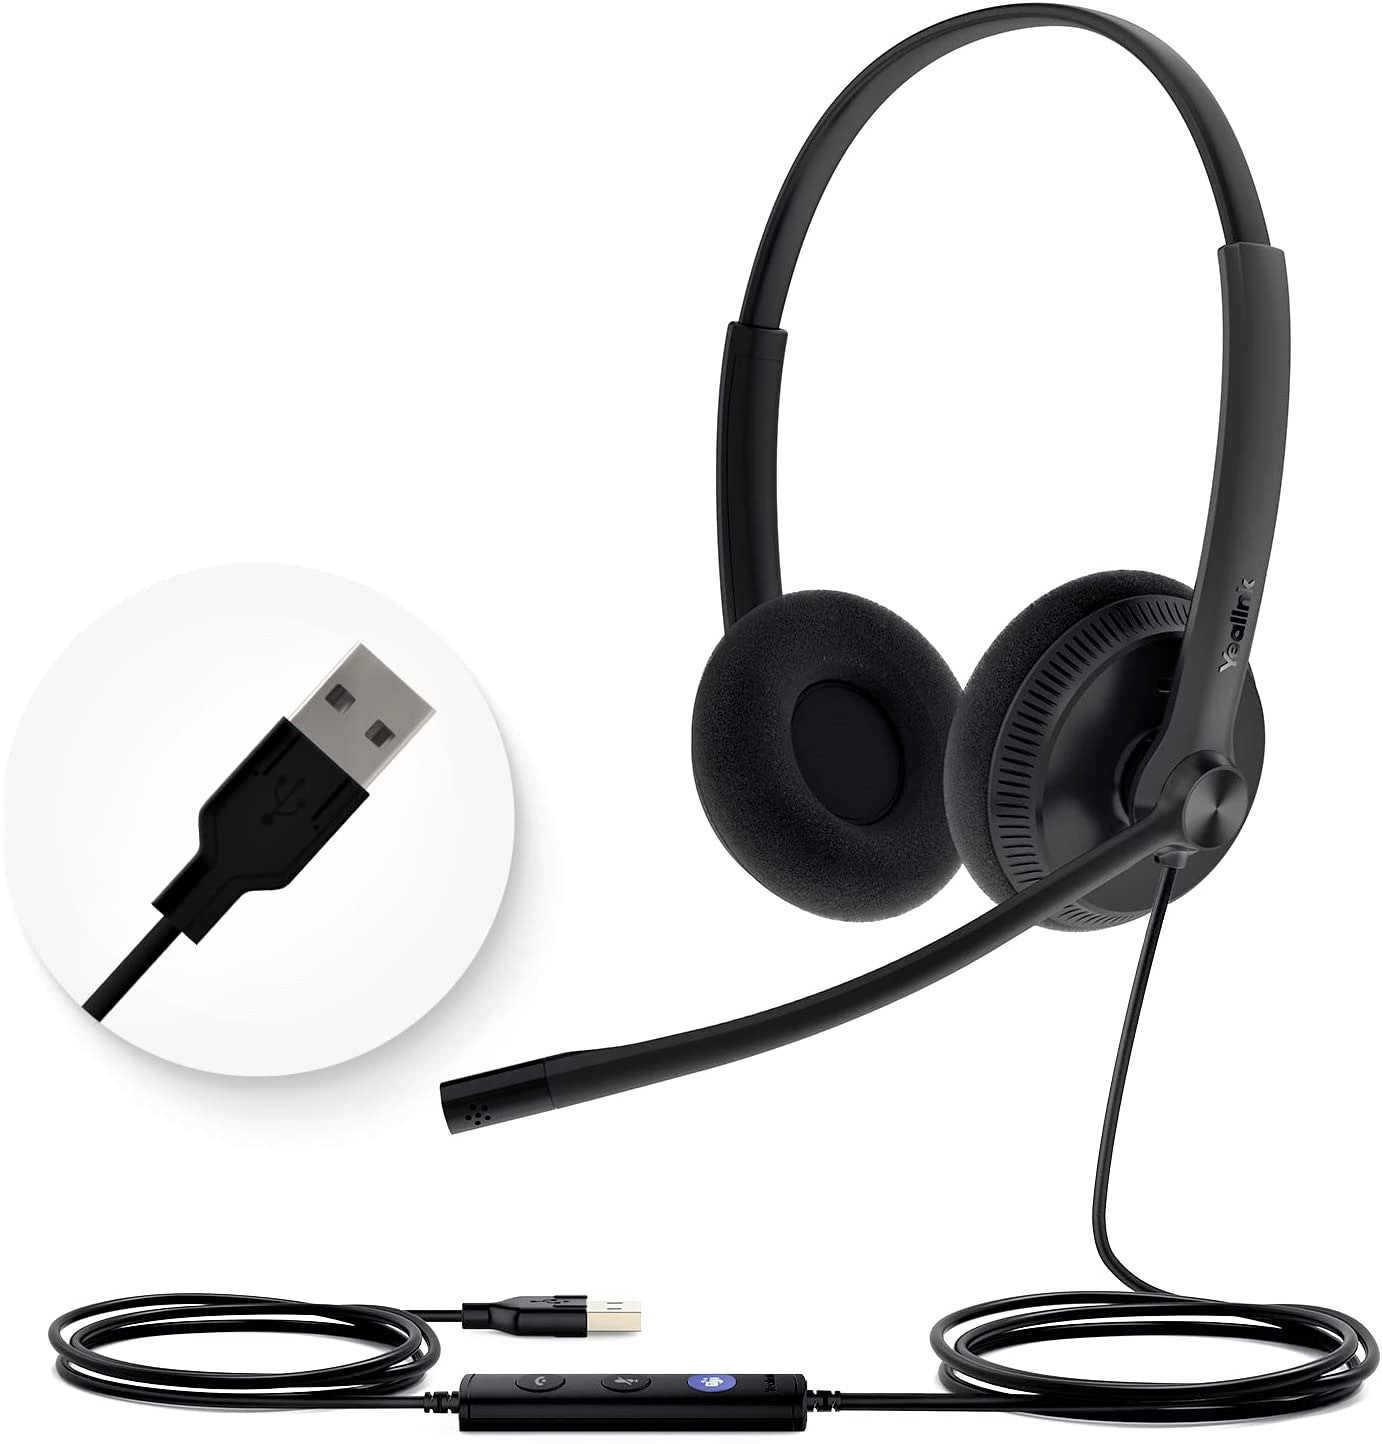 Yealink Headset with Microphone USB Headset Computer Headset PC Laptop Headset Teams Certified UH36 UH34 Wired Noise Cancelling with Mic Stereo for Microsoft Optimized